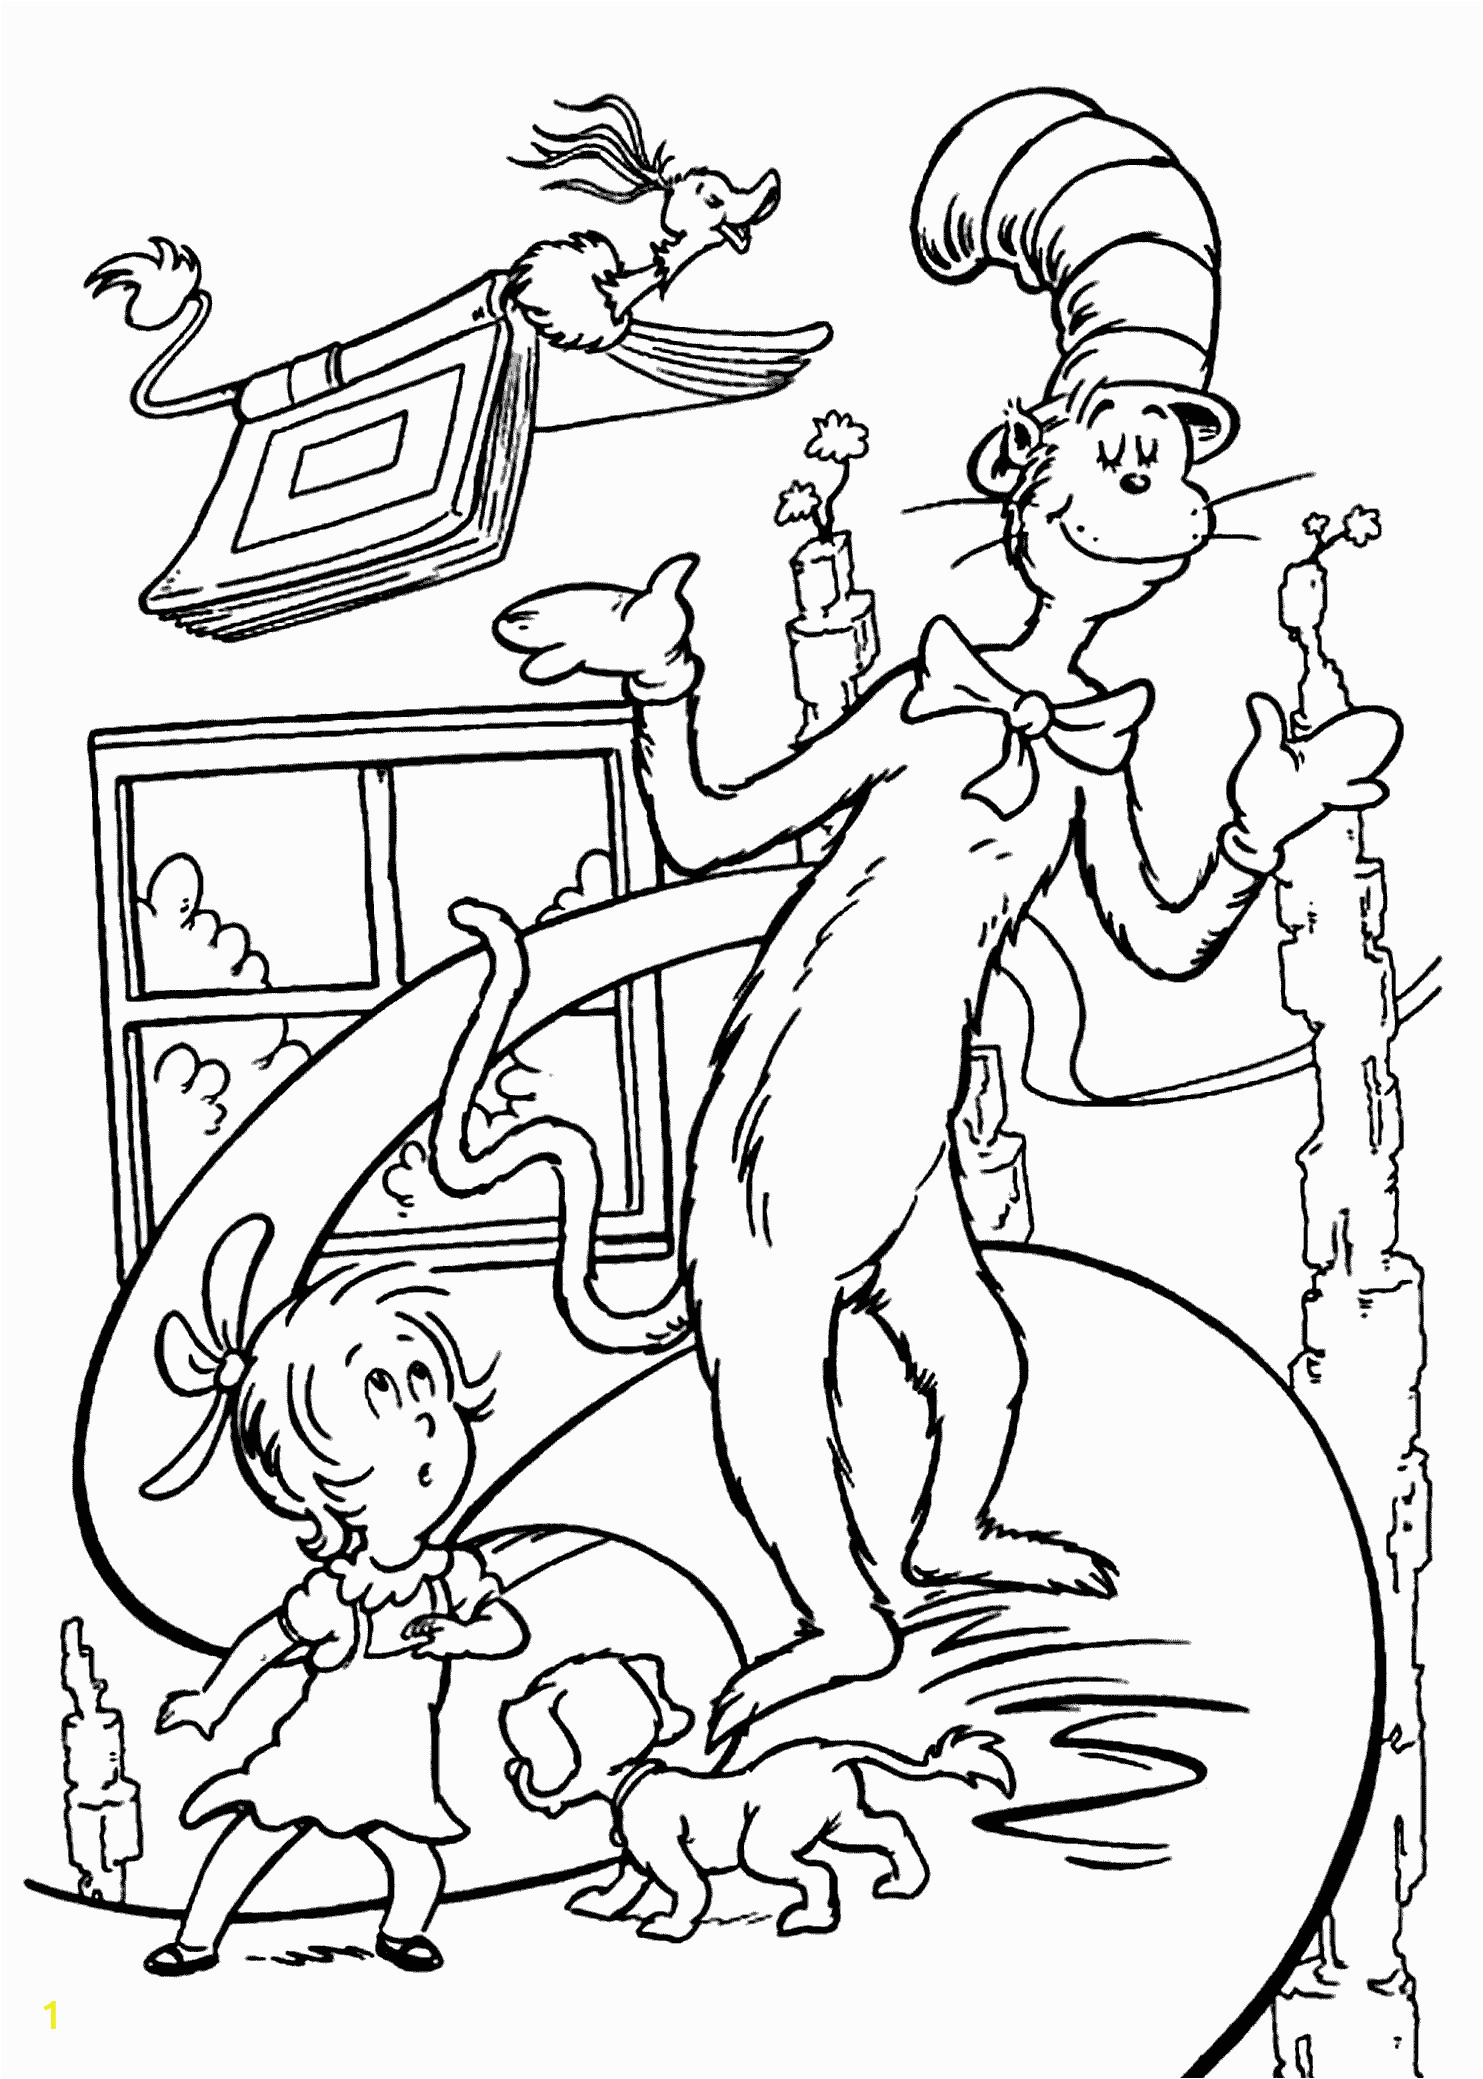 7c48b378db2f edaac de spectacular cat and the hat coloring pages 96 for your with cat 1483 2079